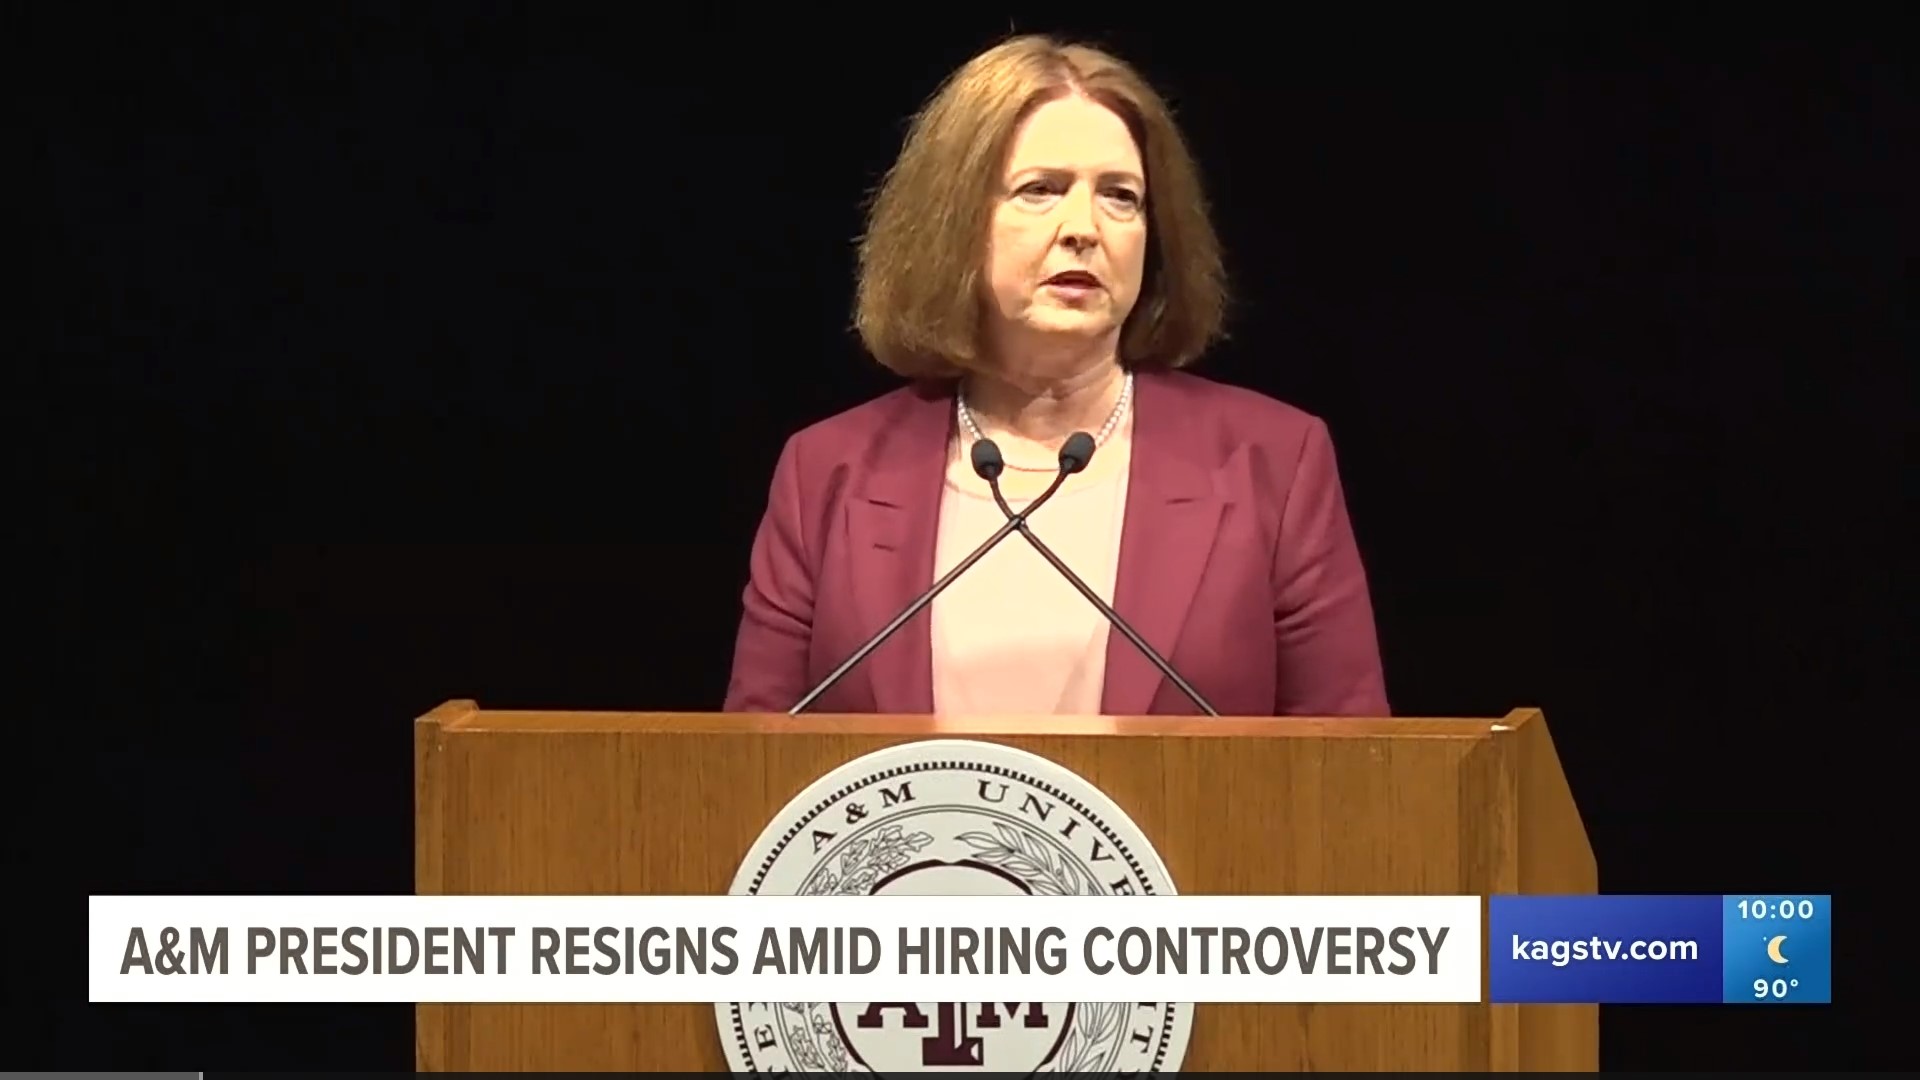 According to journalism professor Nathan Crick, Banks "did the right thing by resigning" because of how bad her image had become among Texas A&M faculty members.